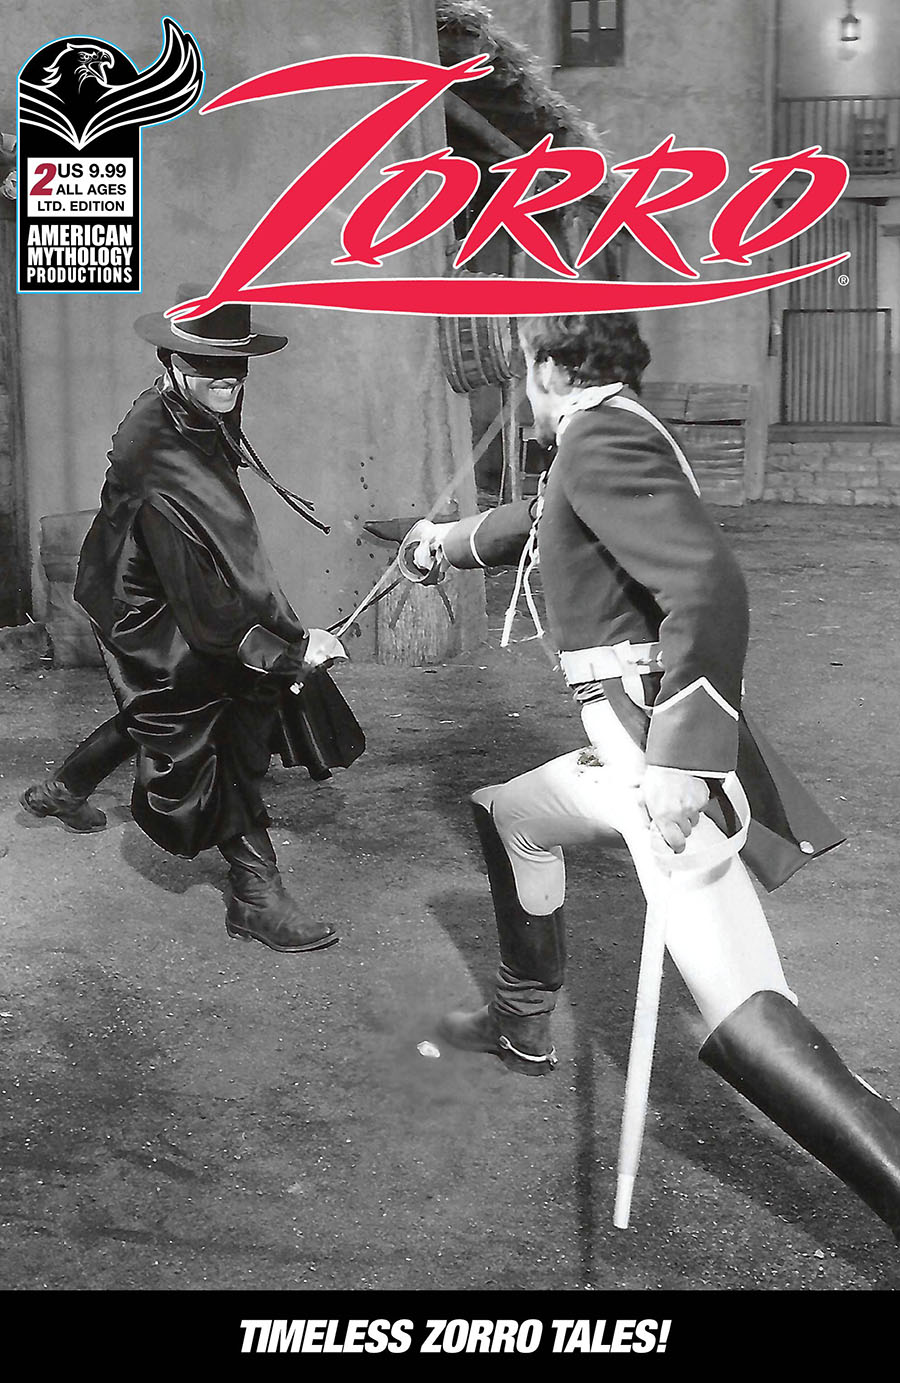 American Mythology Archives Zorro 1958 Dell Four Color #960 Cover B Limited Edition Black & White Photo Cover